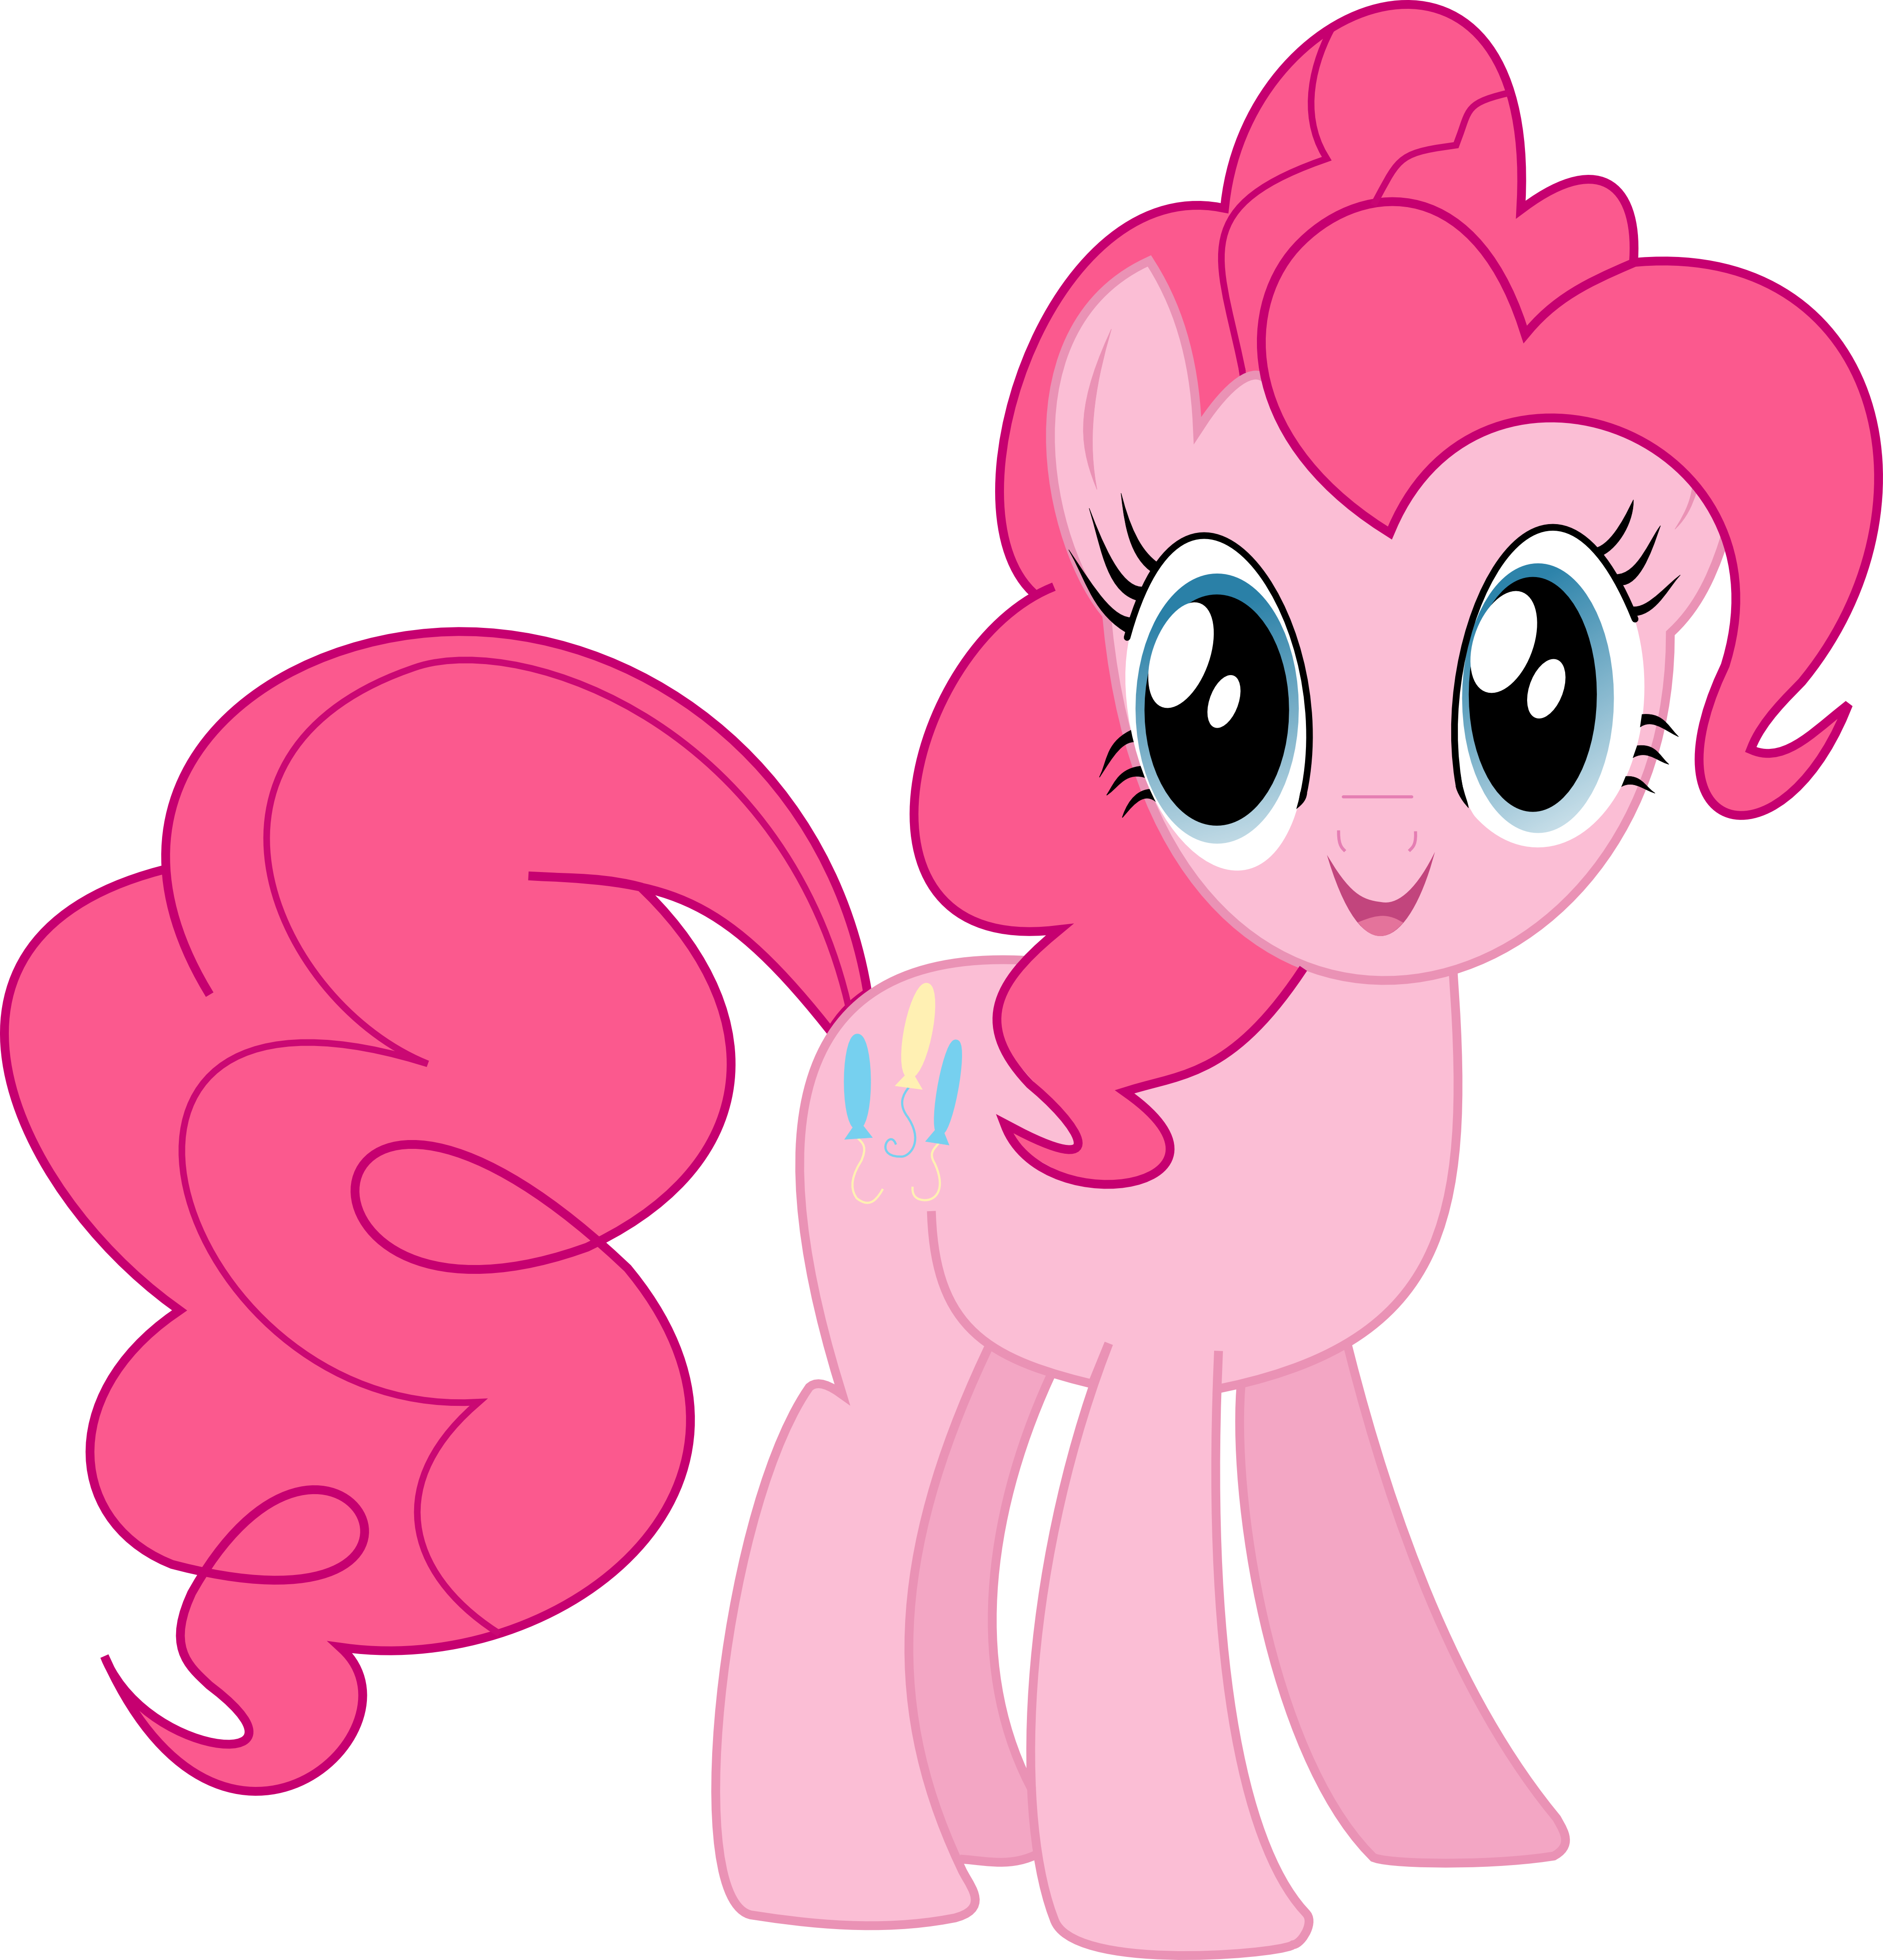 Pinkie Pie smiling vector by Pangbot on DeviantArt